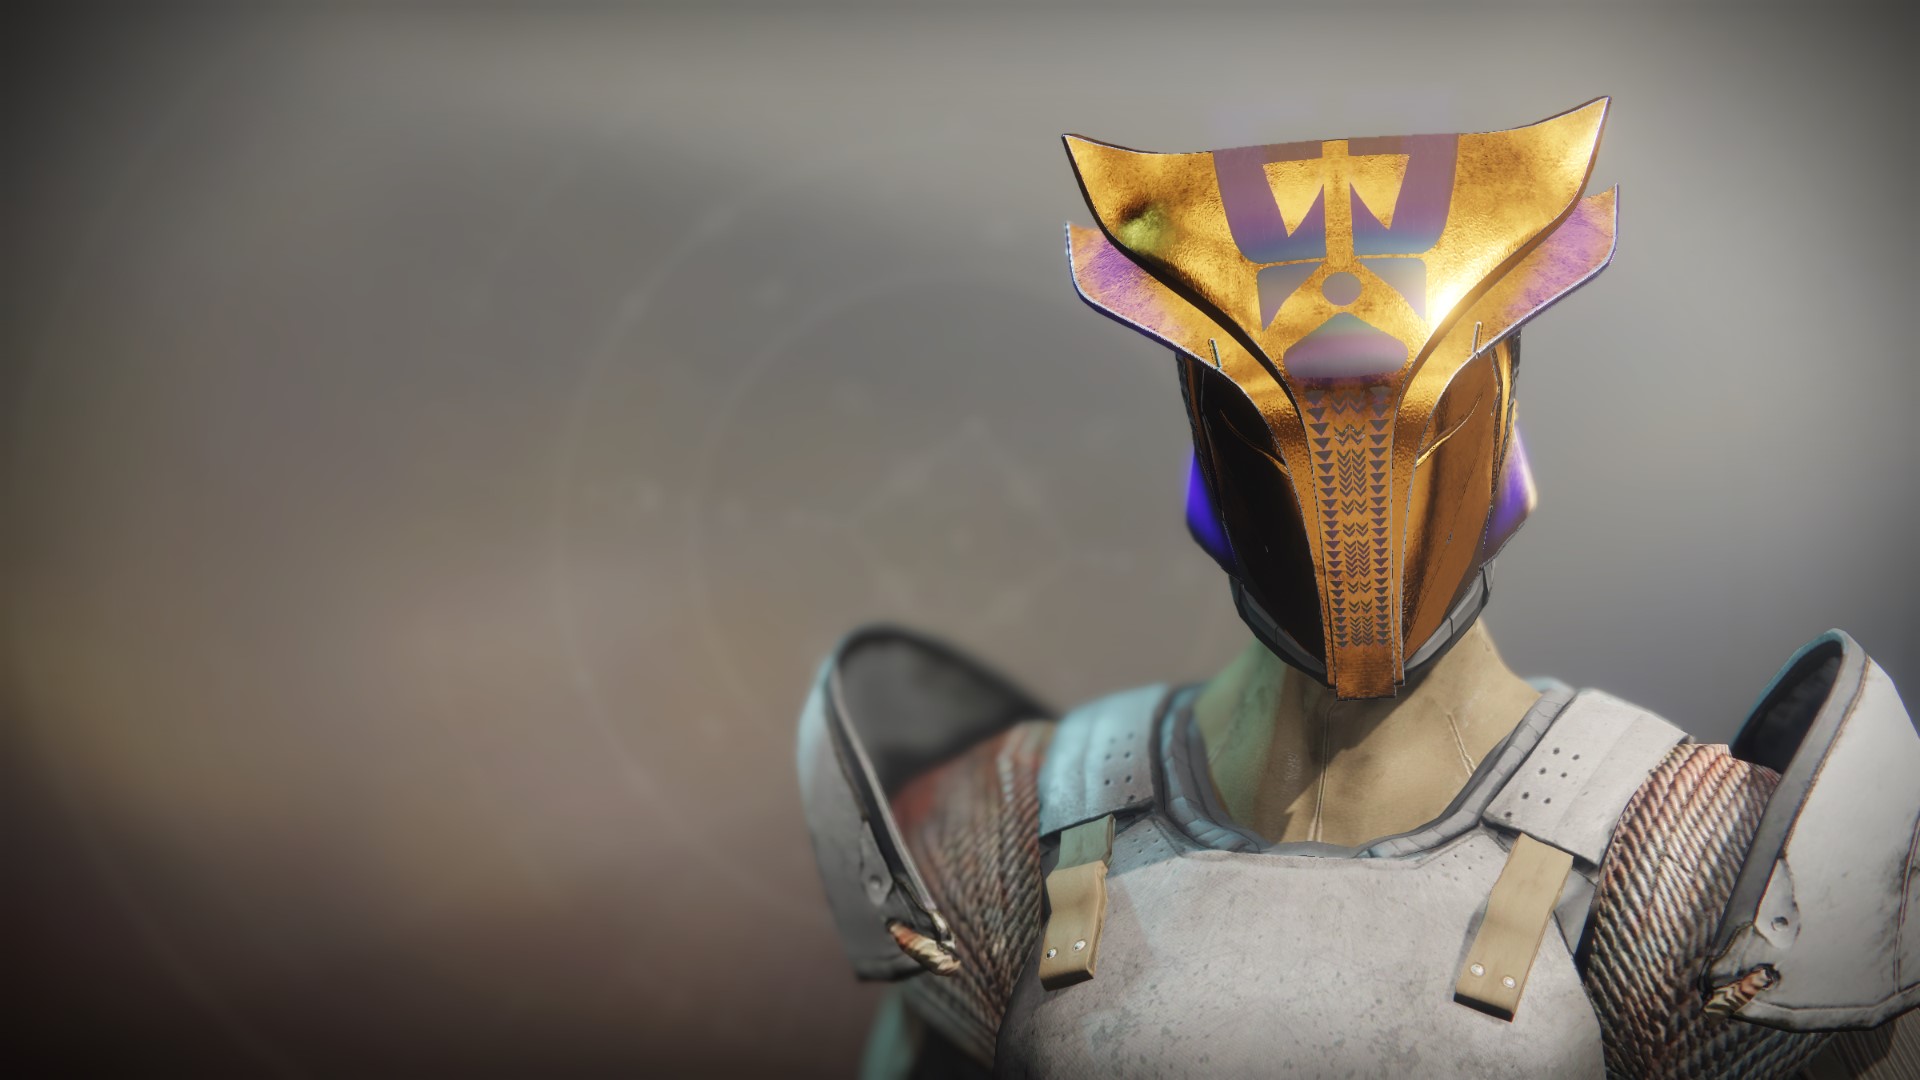 An in-game render of the Helm of the Emperor's Champion.